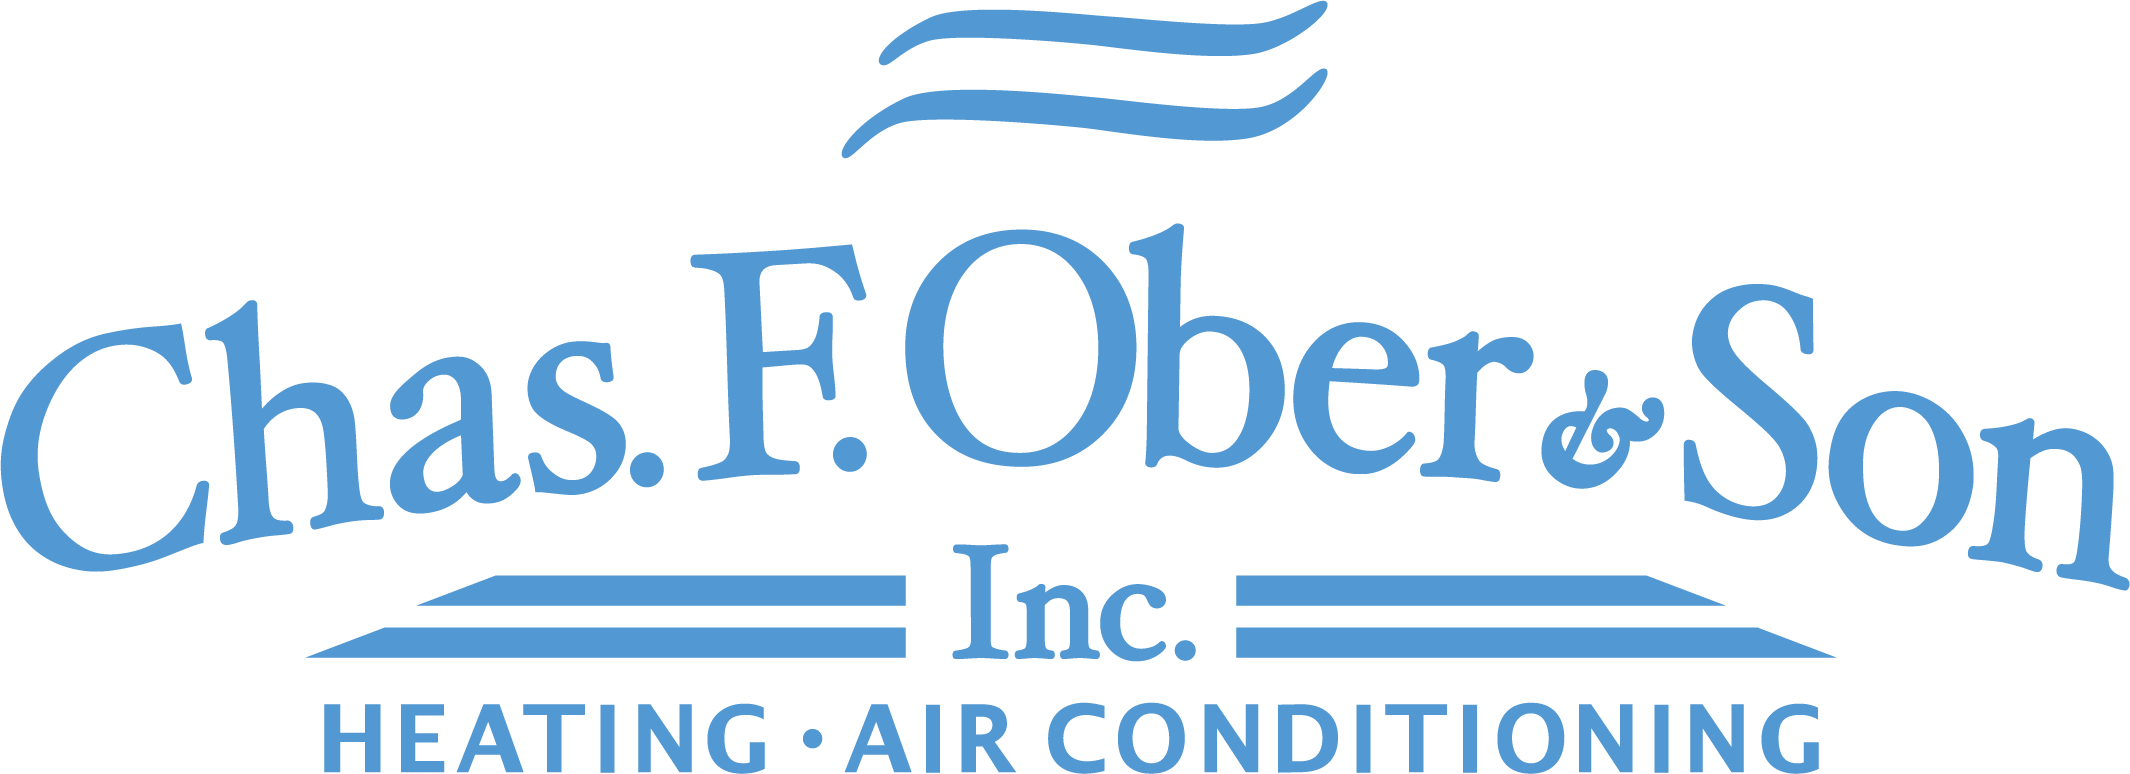 Charles F Ober and Son Heating and Air